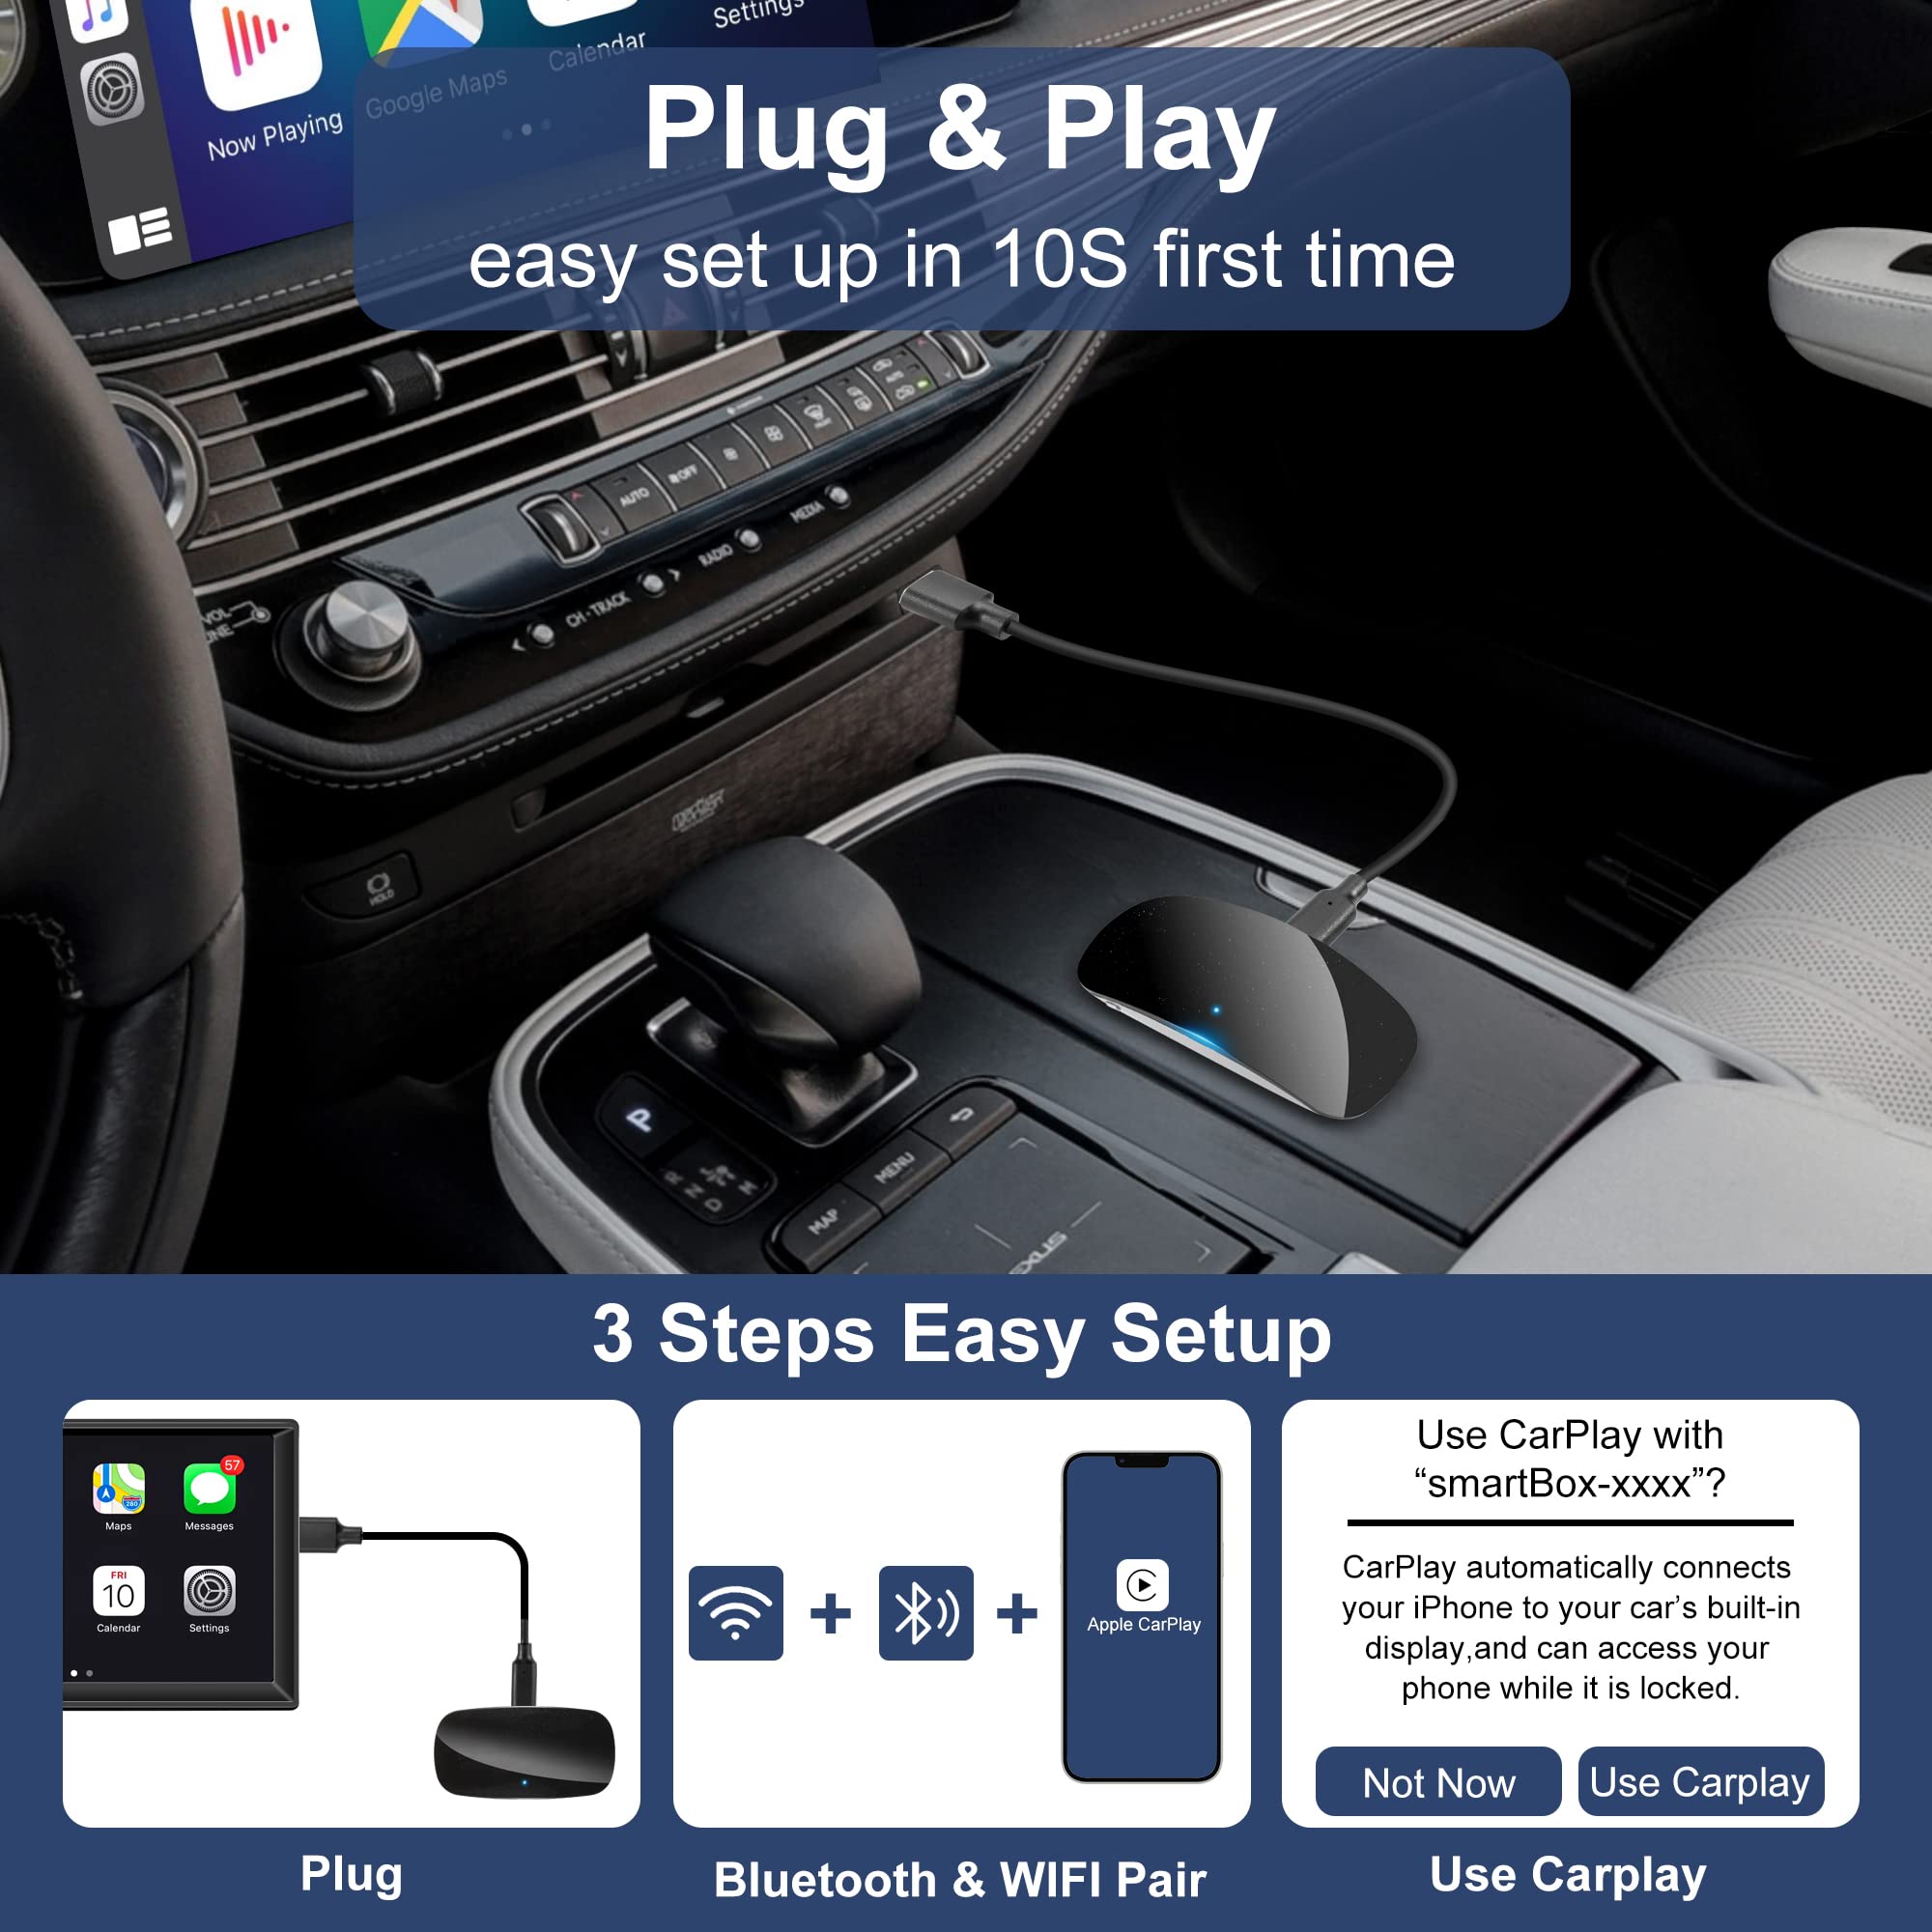 Wireless CarPlay Adapter for Factory Wired CarPlay, Wireless Dongle for Apple CarPlay Cars from 2017 and iPhone iOS 12+, Plug & Play, Online Update (White)